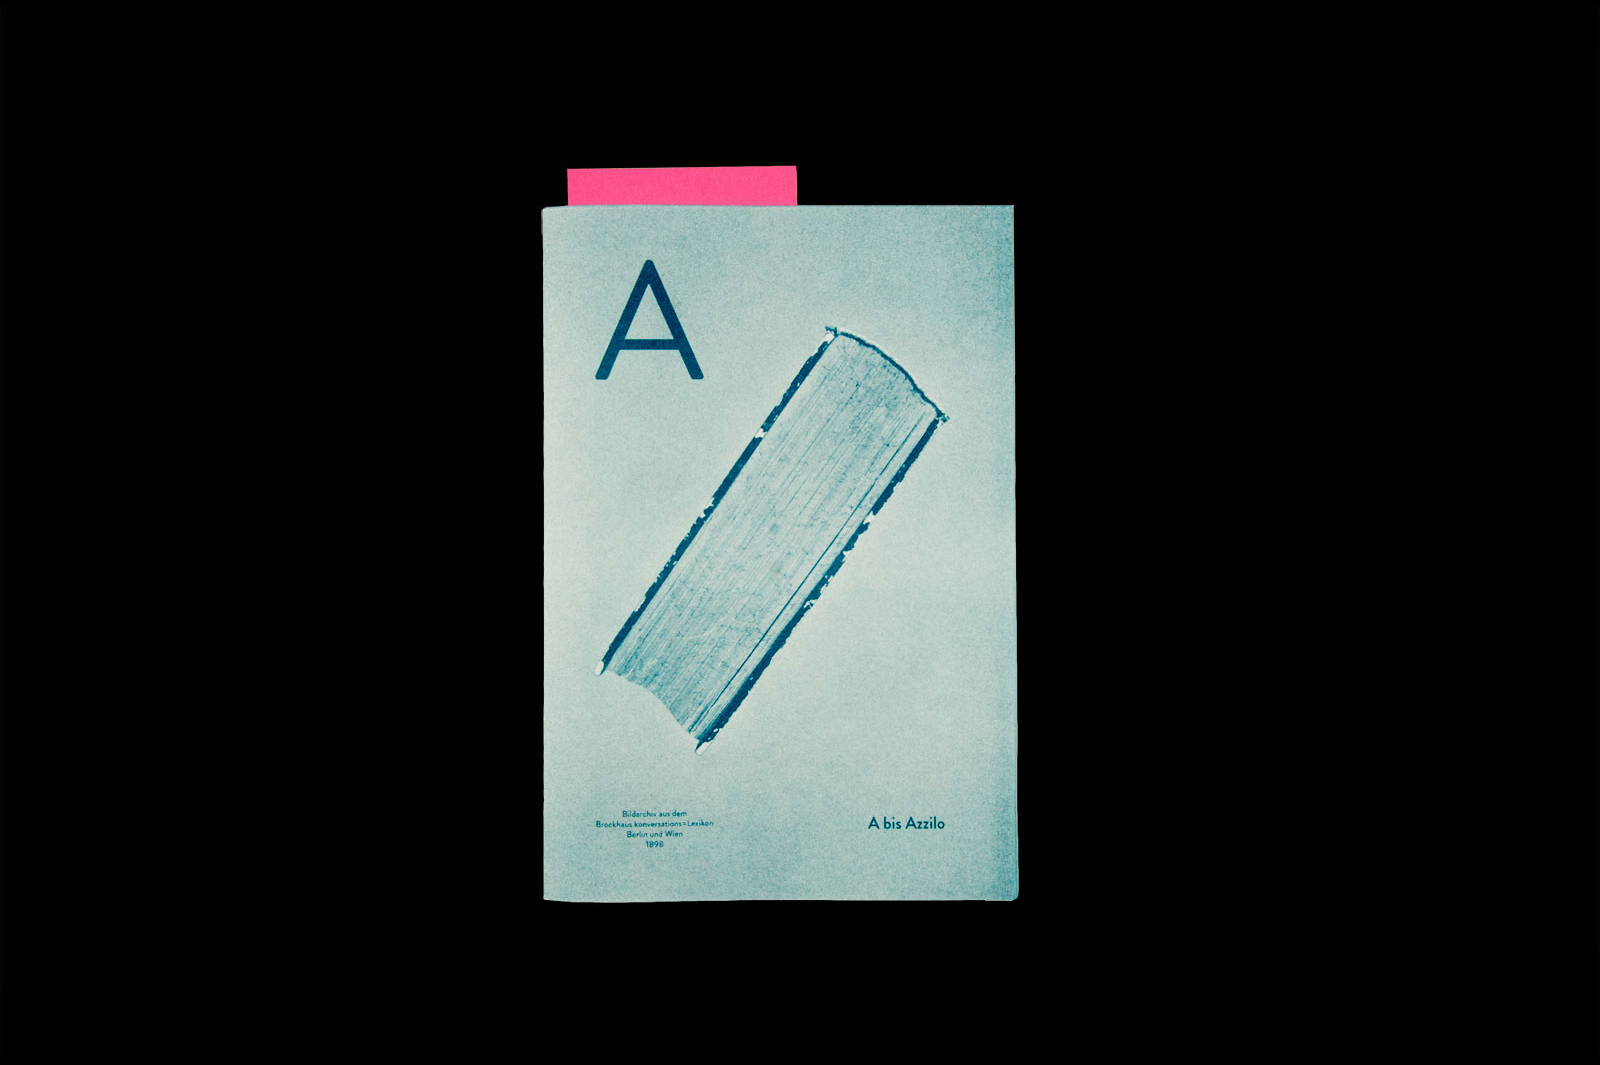 'A', a publication by Esther Rieser